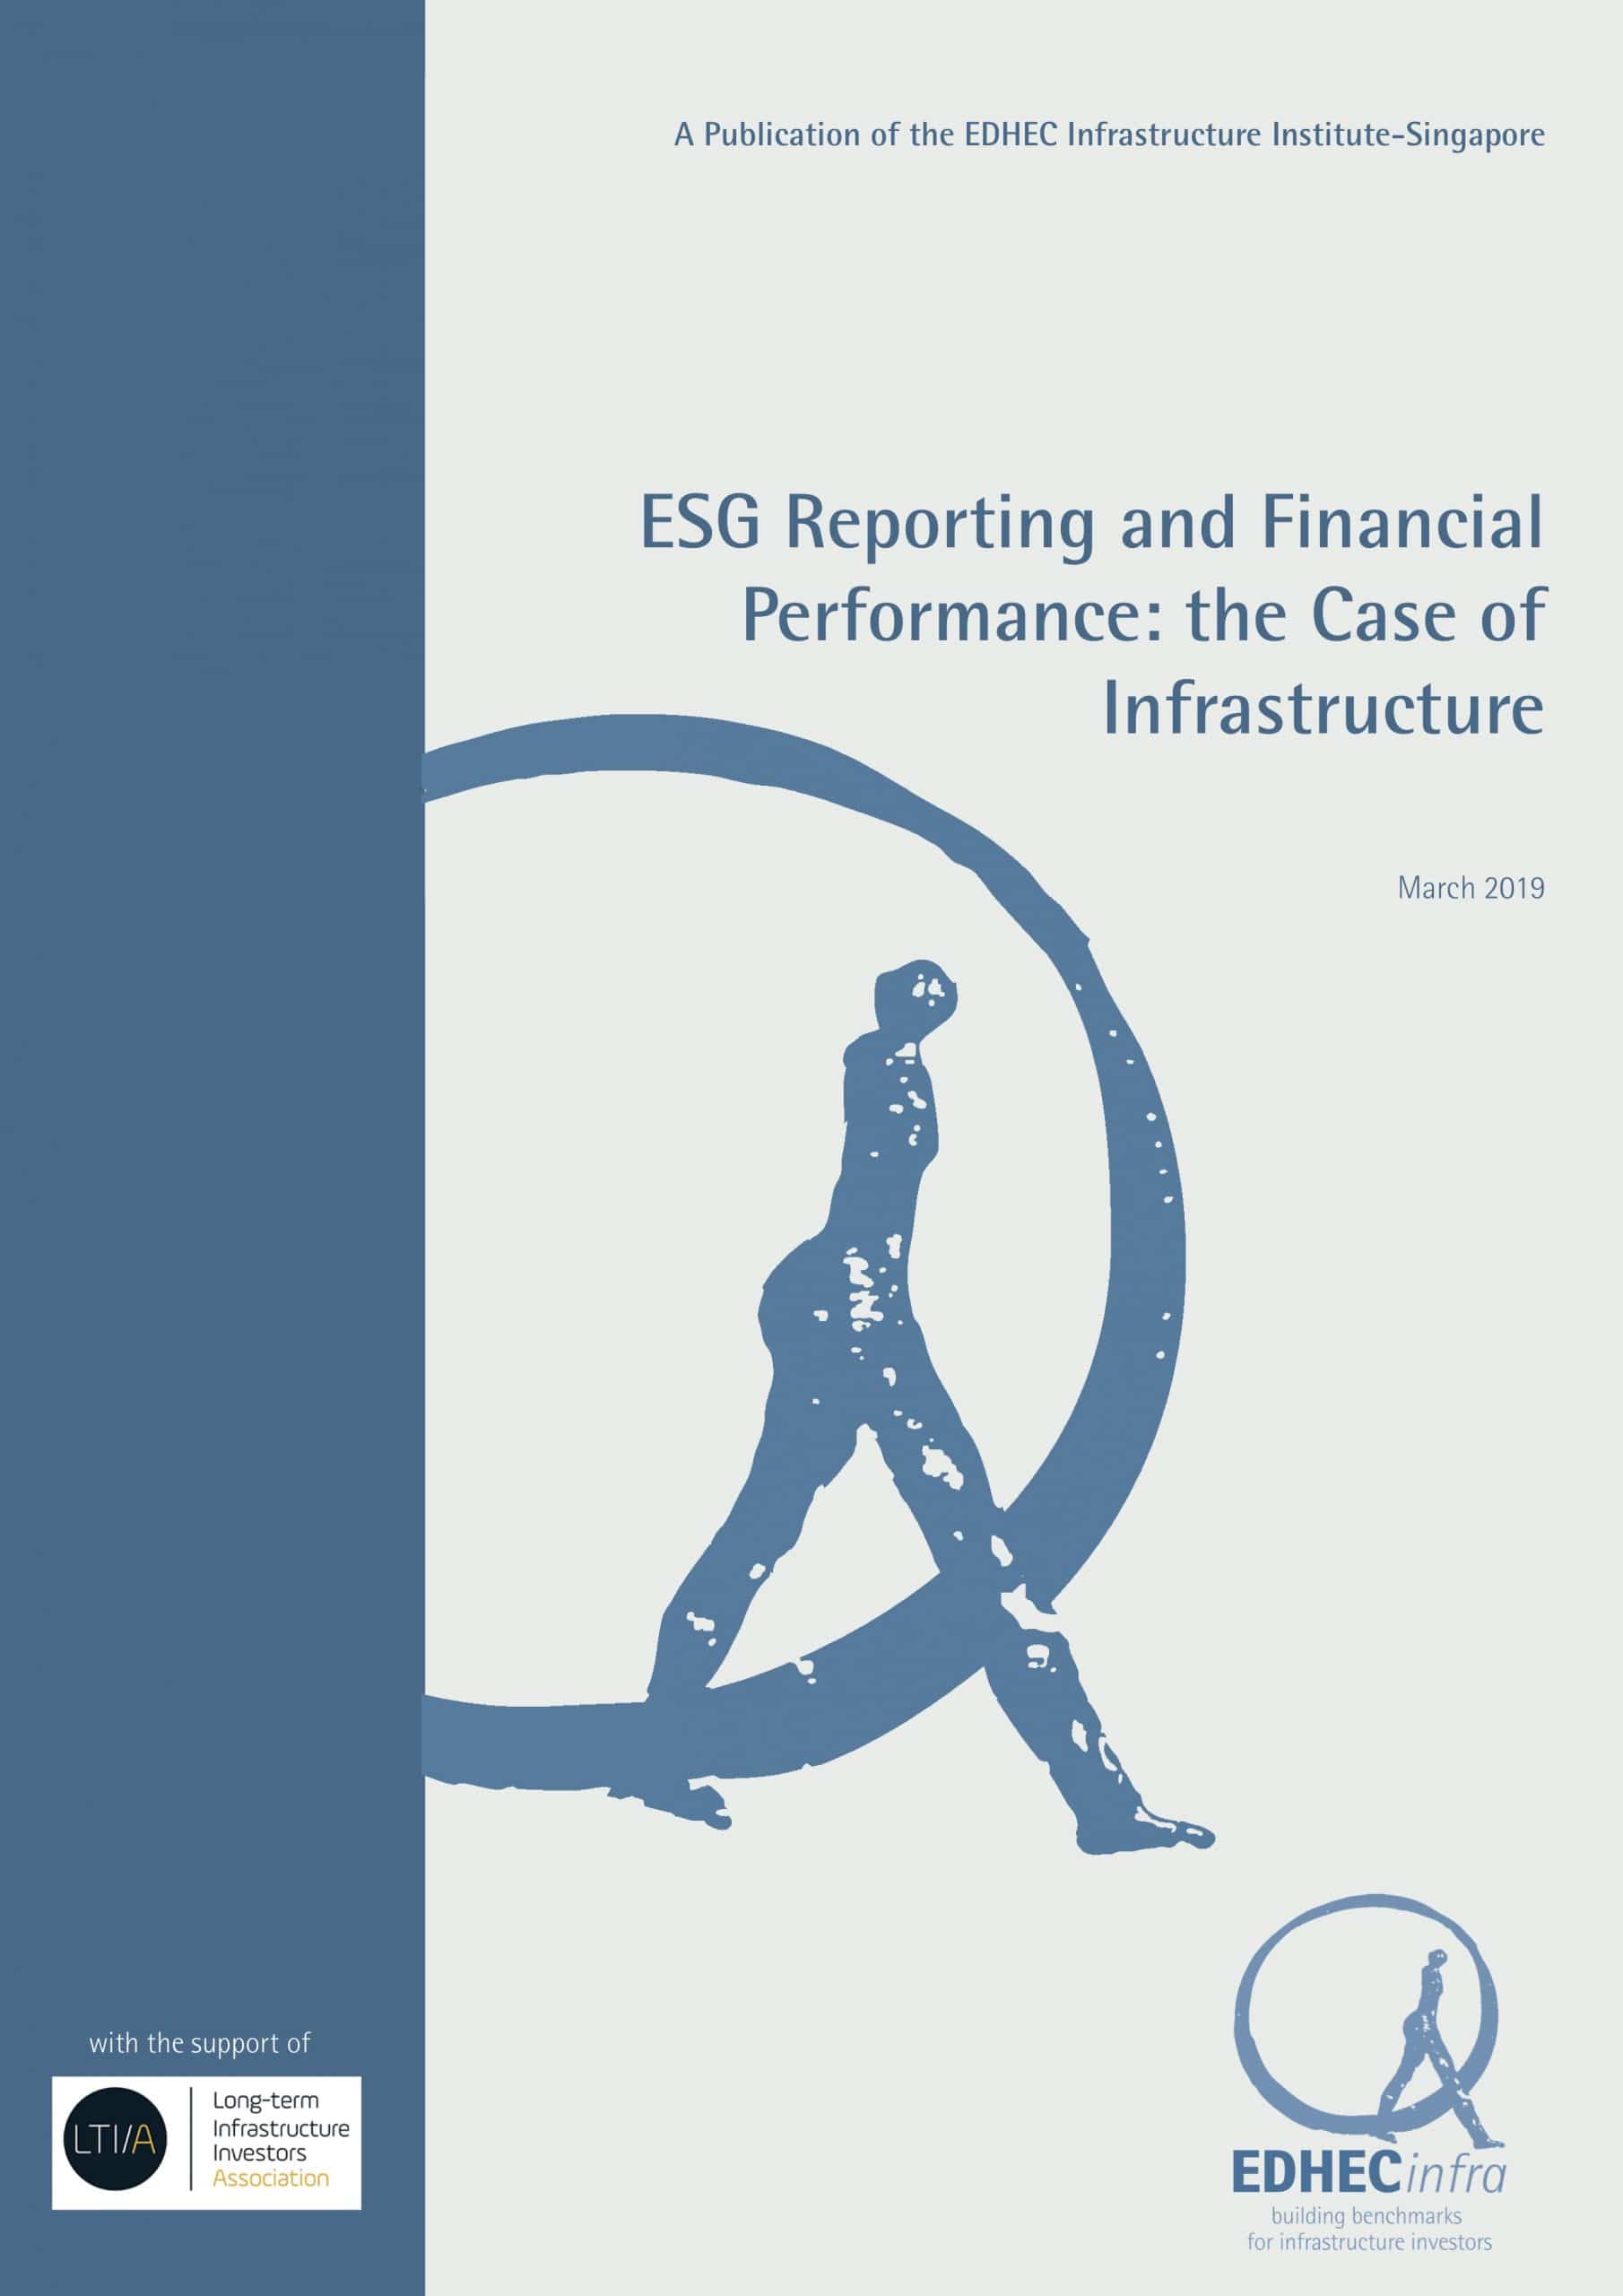 ESG Reporting and Financial Performance: the Case of Infrastructure